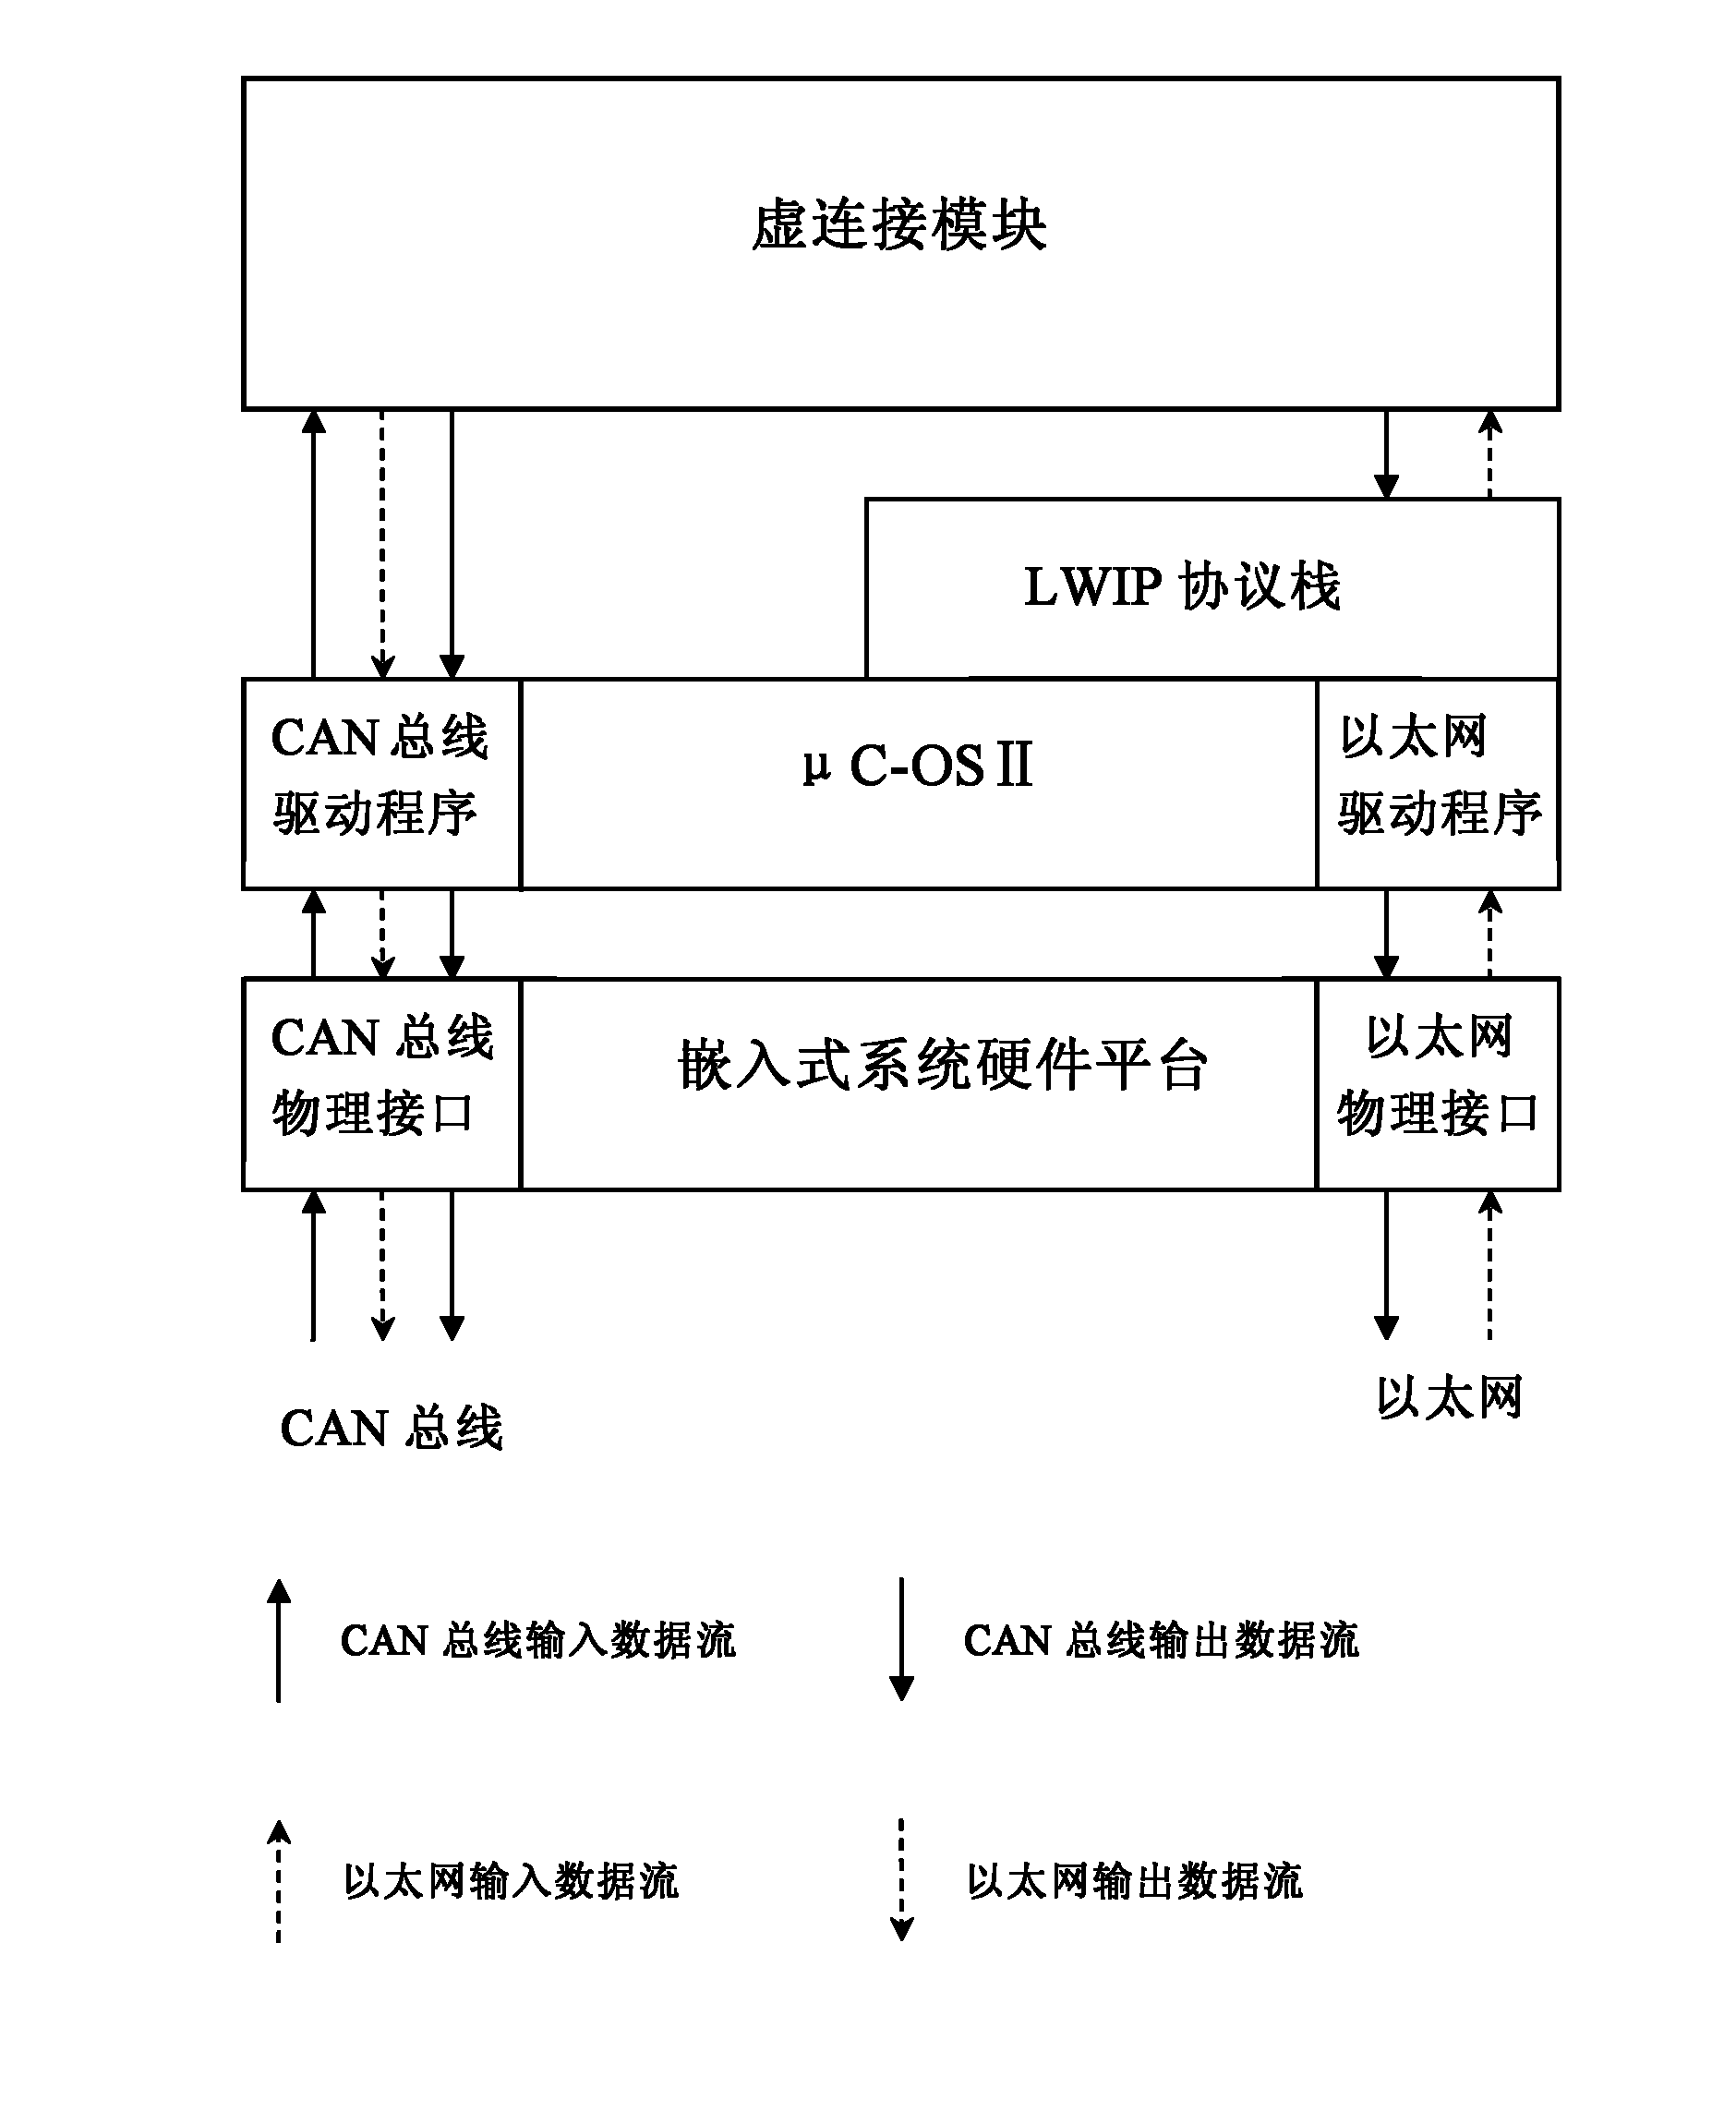 Virtual connection supporting real-time embedded gateway based on controller area network (CAN) bus and Ethernet